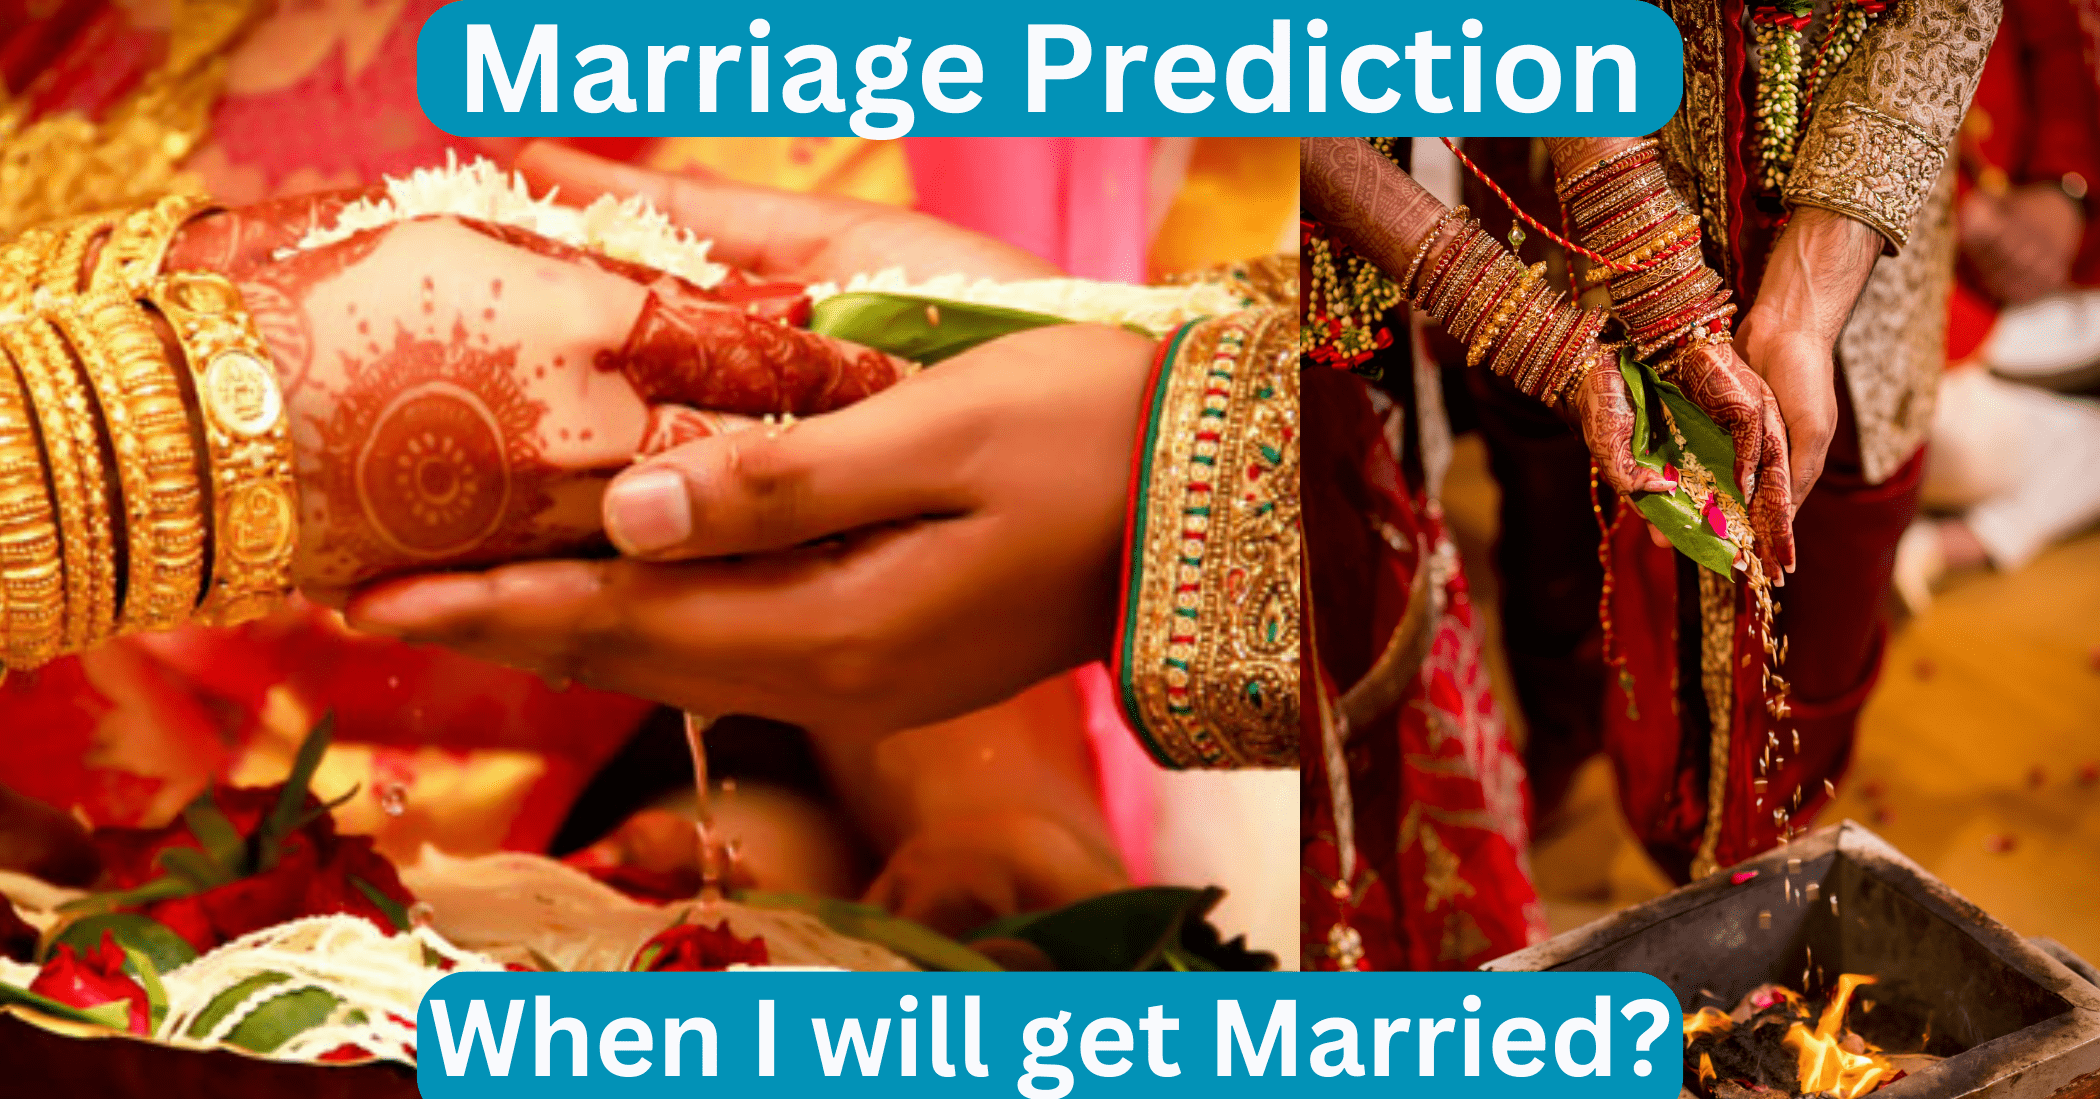 Marriage prediction according to Date of Birth